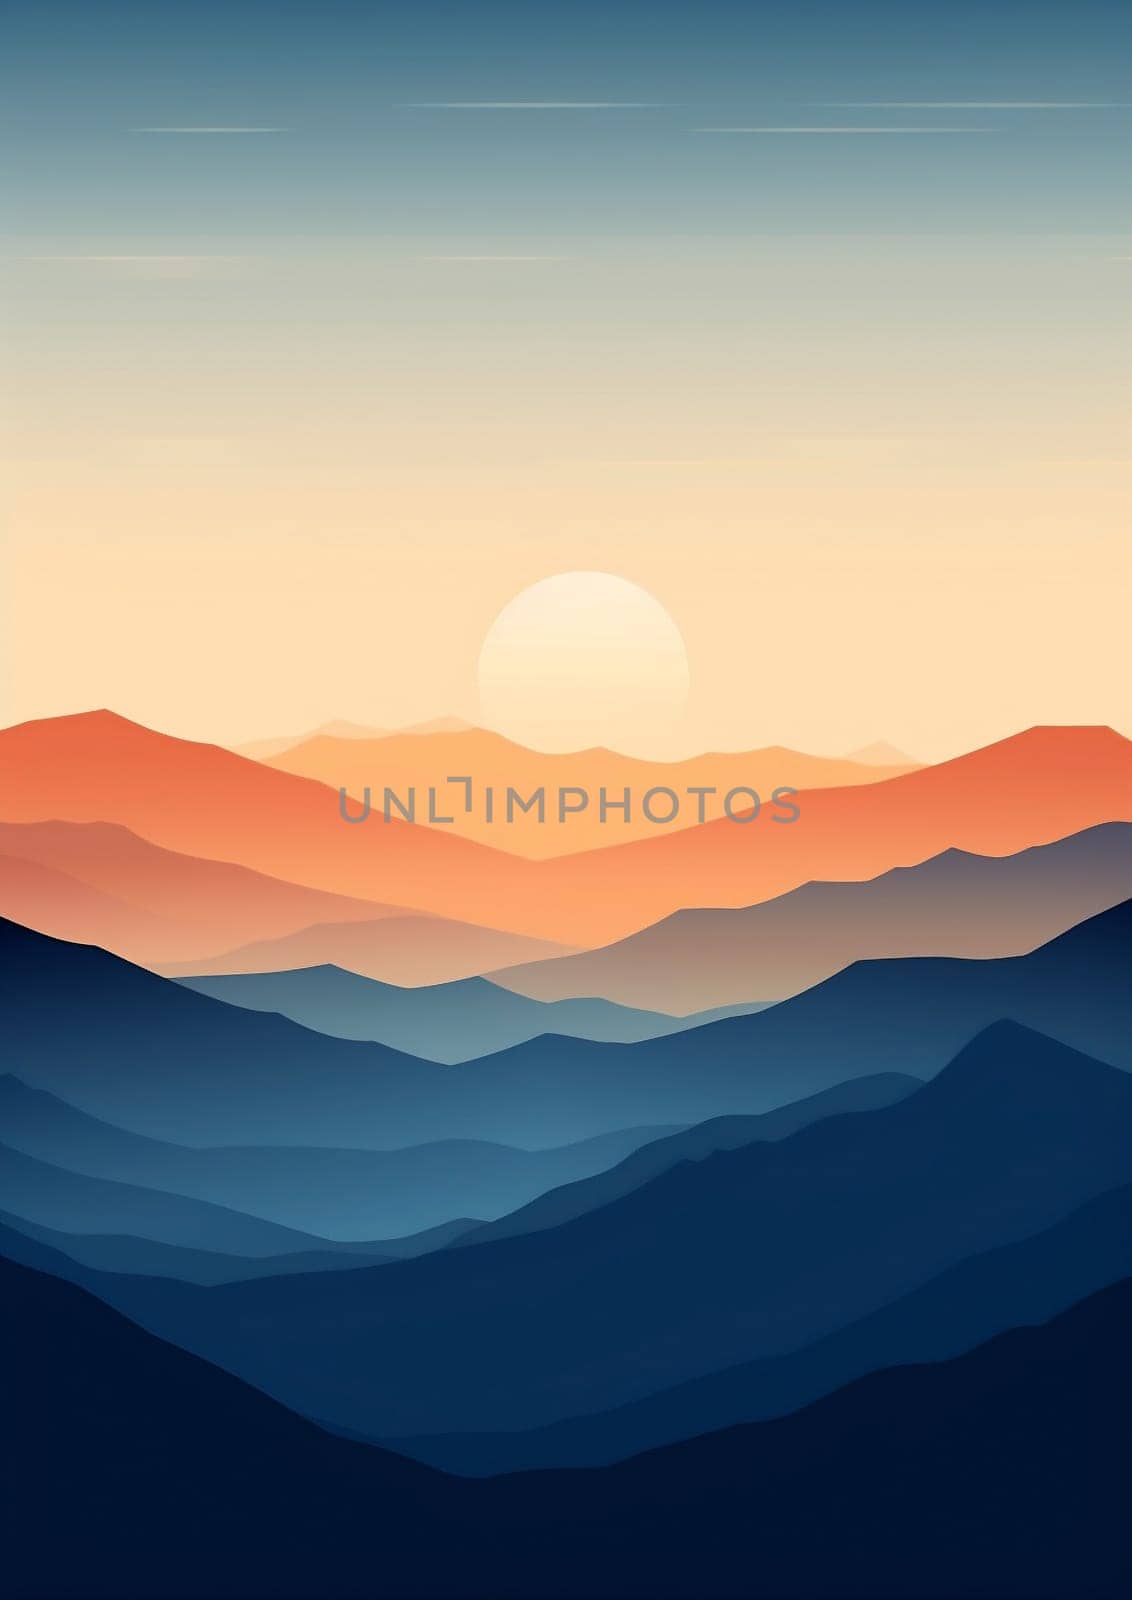 Sunset morning blue hill illustration landscape nature sky silhouette mountains view sunrise by Vichizh